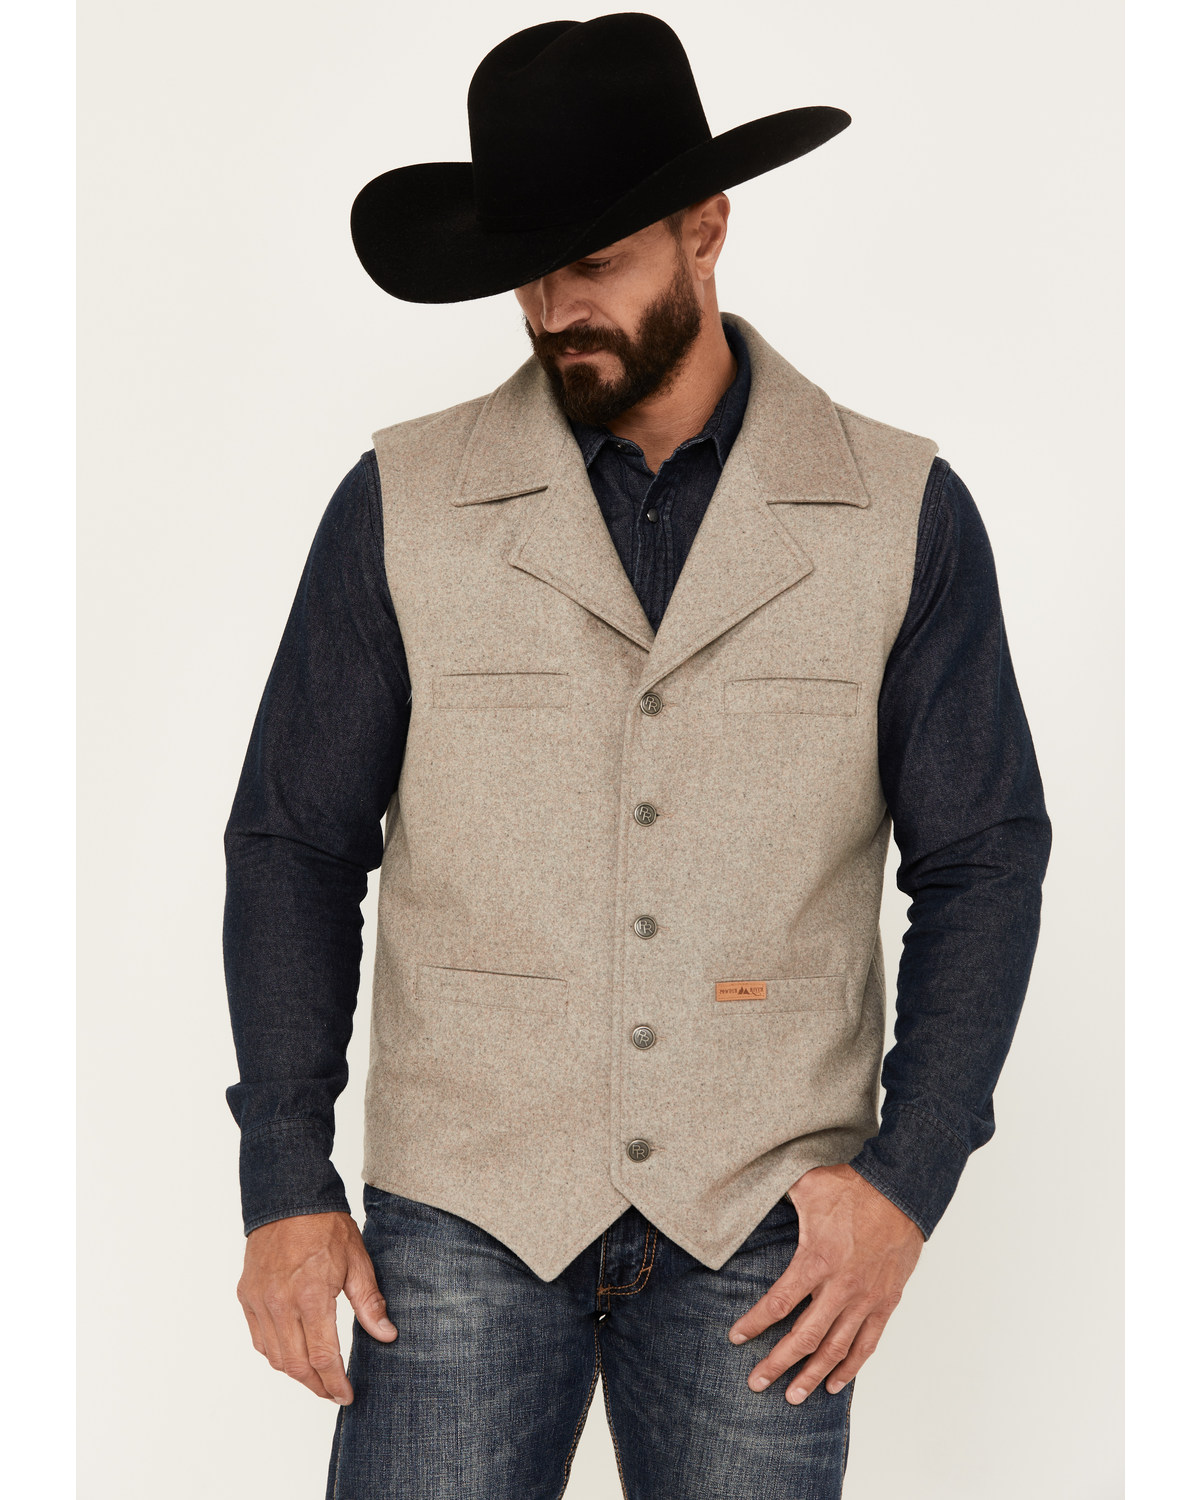 Powder River Outfitters by Panhandle Men's Wool Button-Down Vest